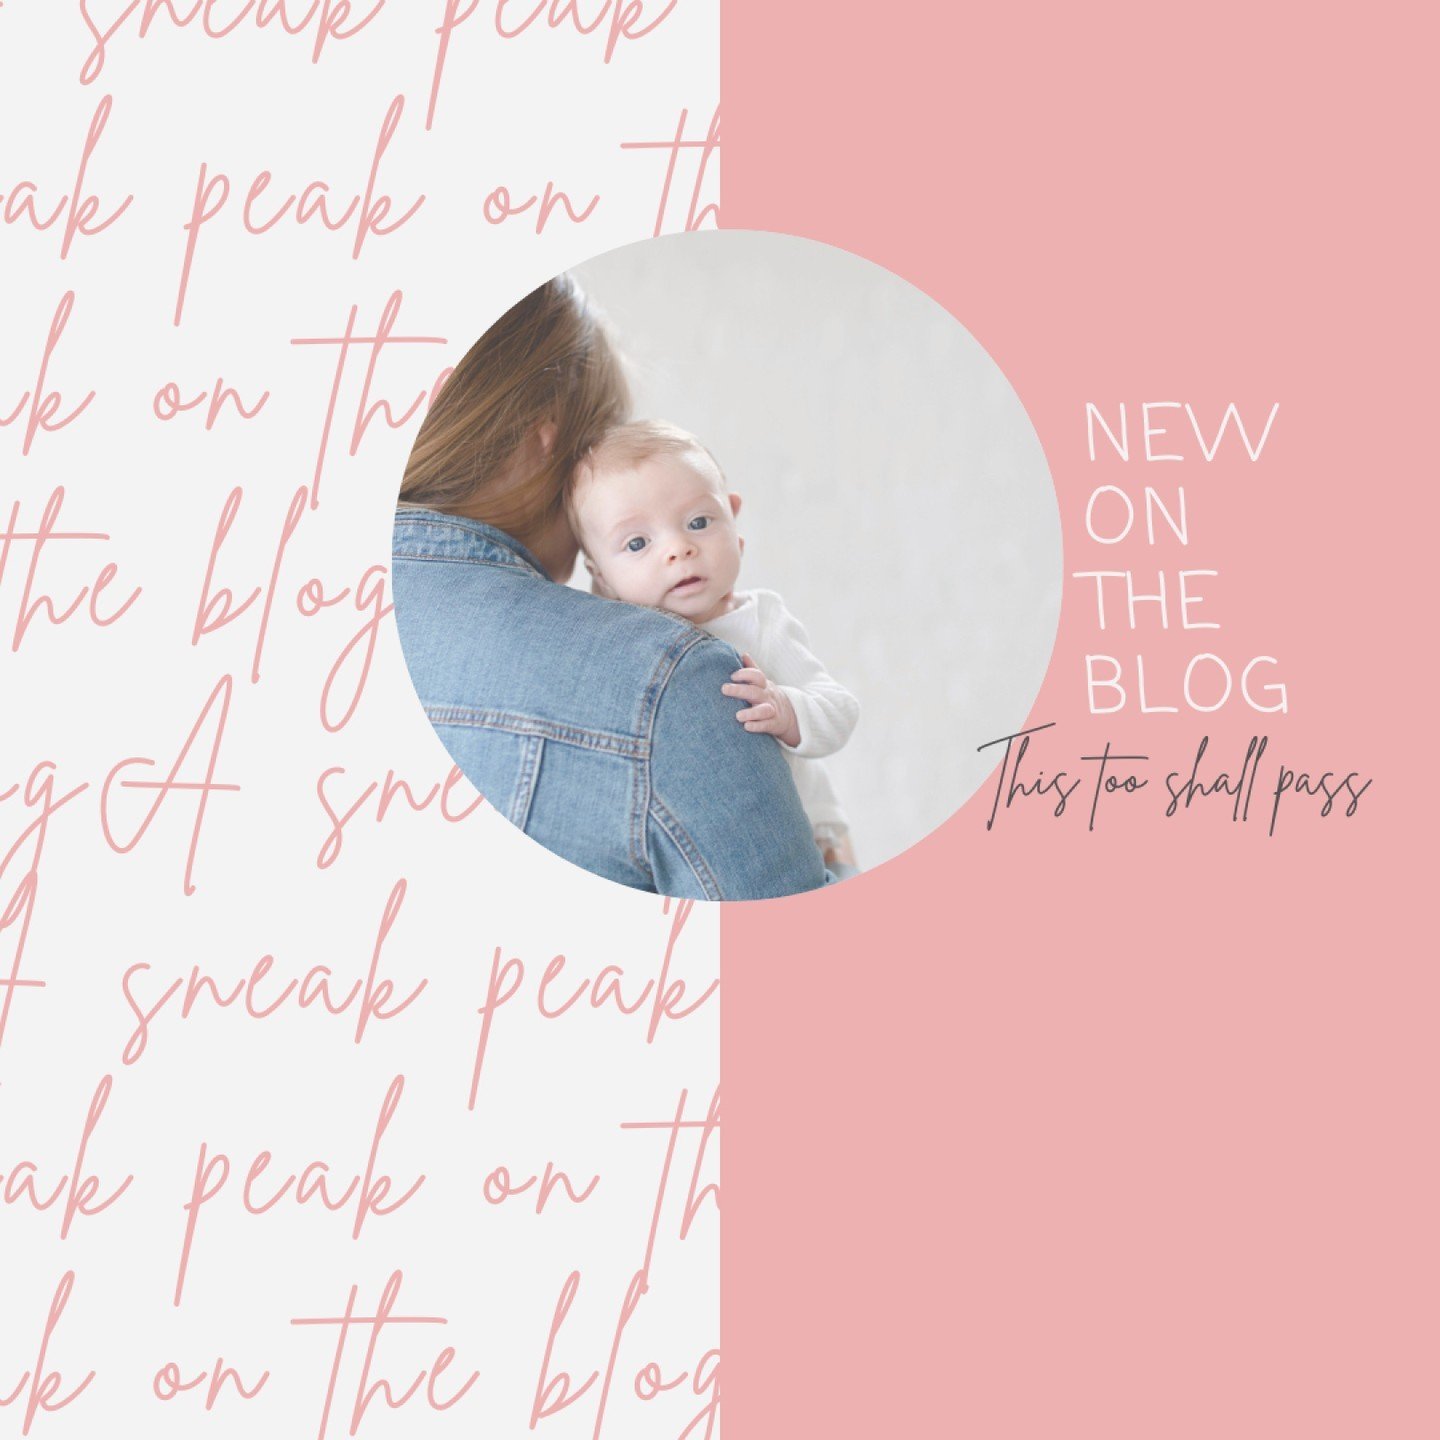 Hey new mama - if you're feeling overwhelmed, exhausted, or uncertain on your journey through motherhood, this blog post is for you. 💖

Whether you're in the midst of sleepless nights, struggling to keep your supply up,  or simply wondering when you